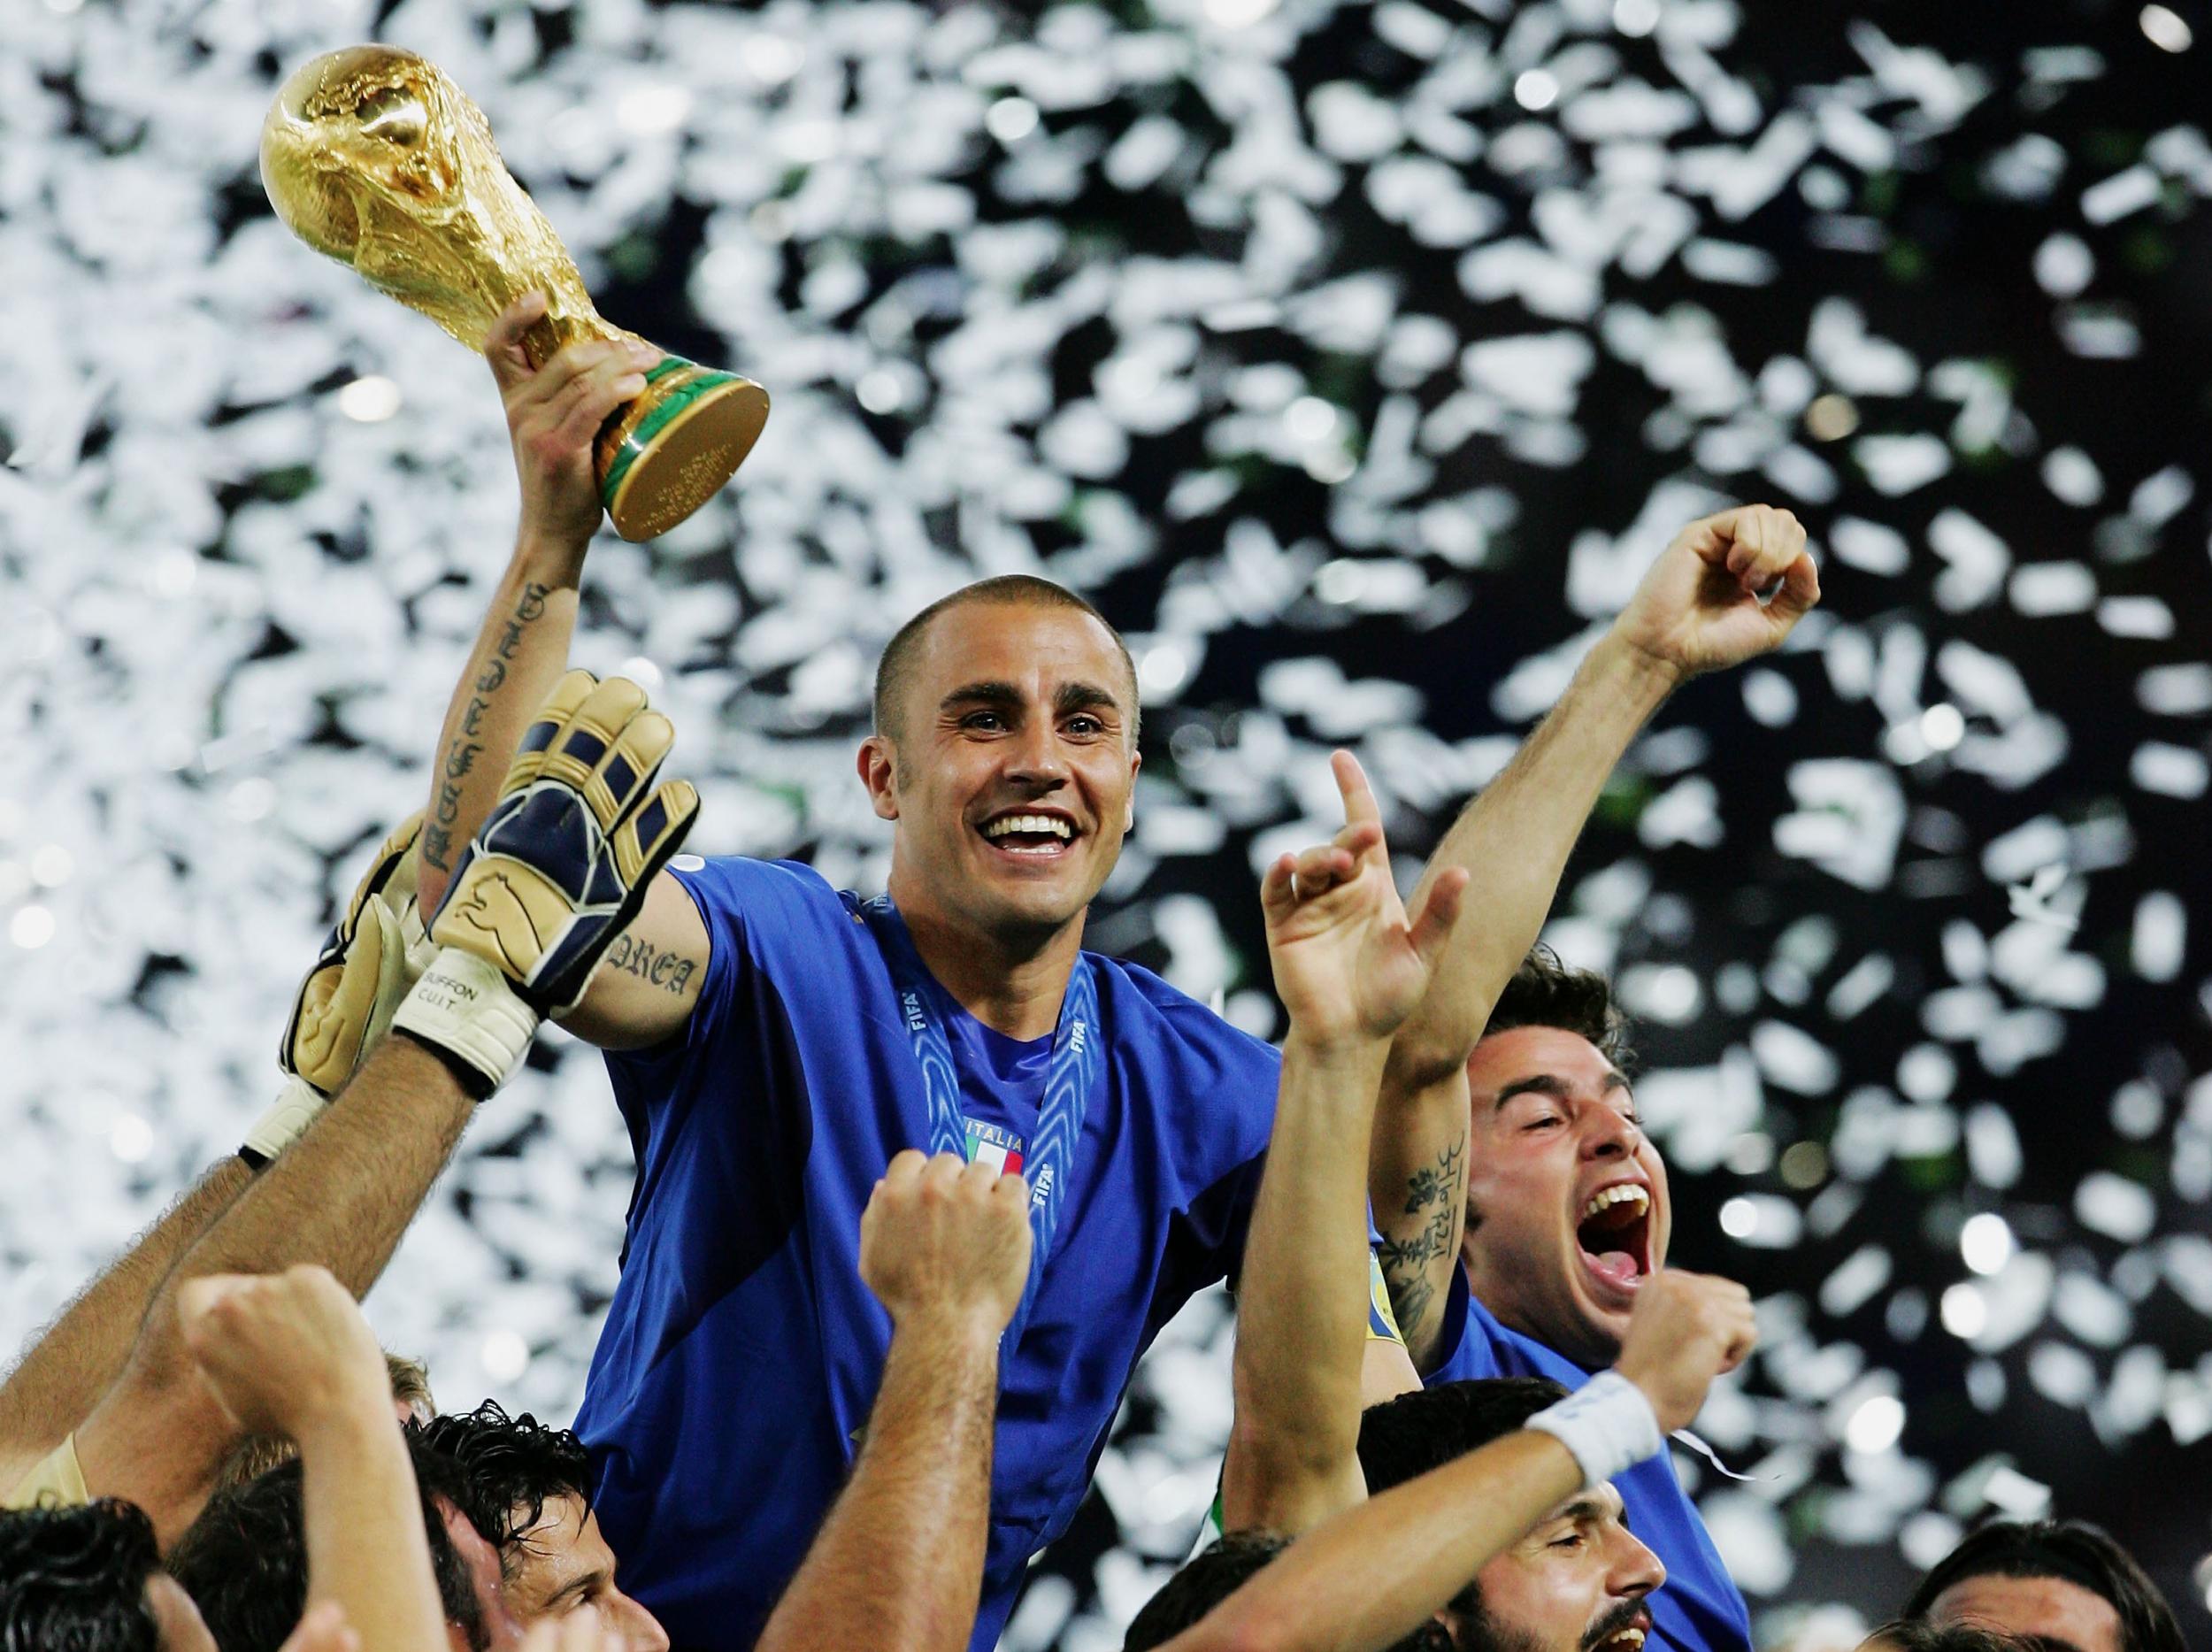 Cannavaro was sublime as Italy won the World Cup